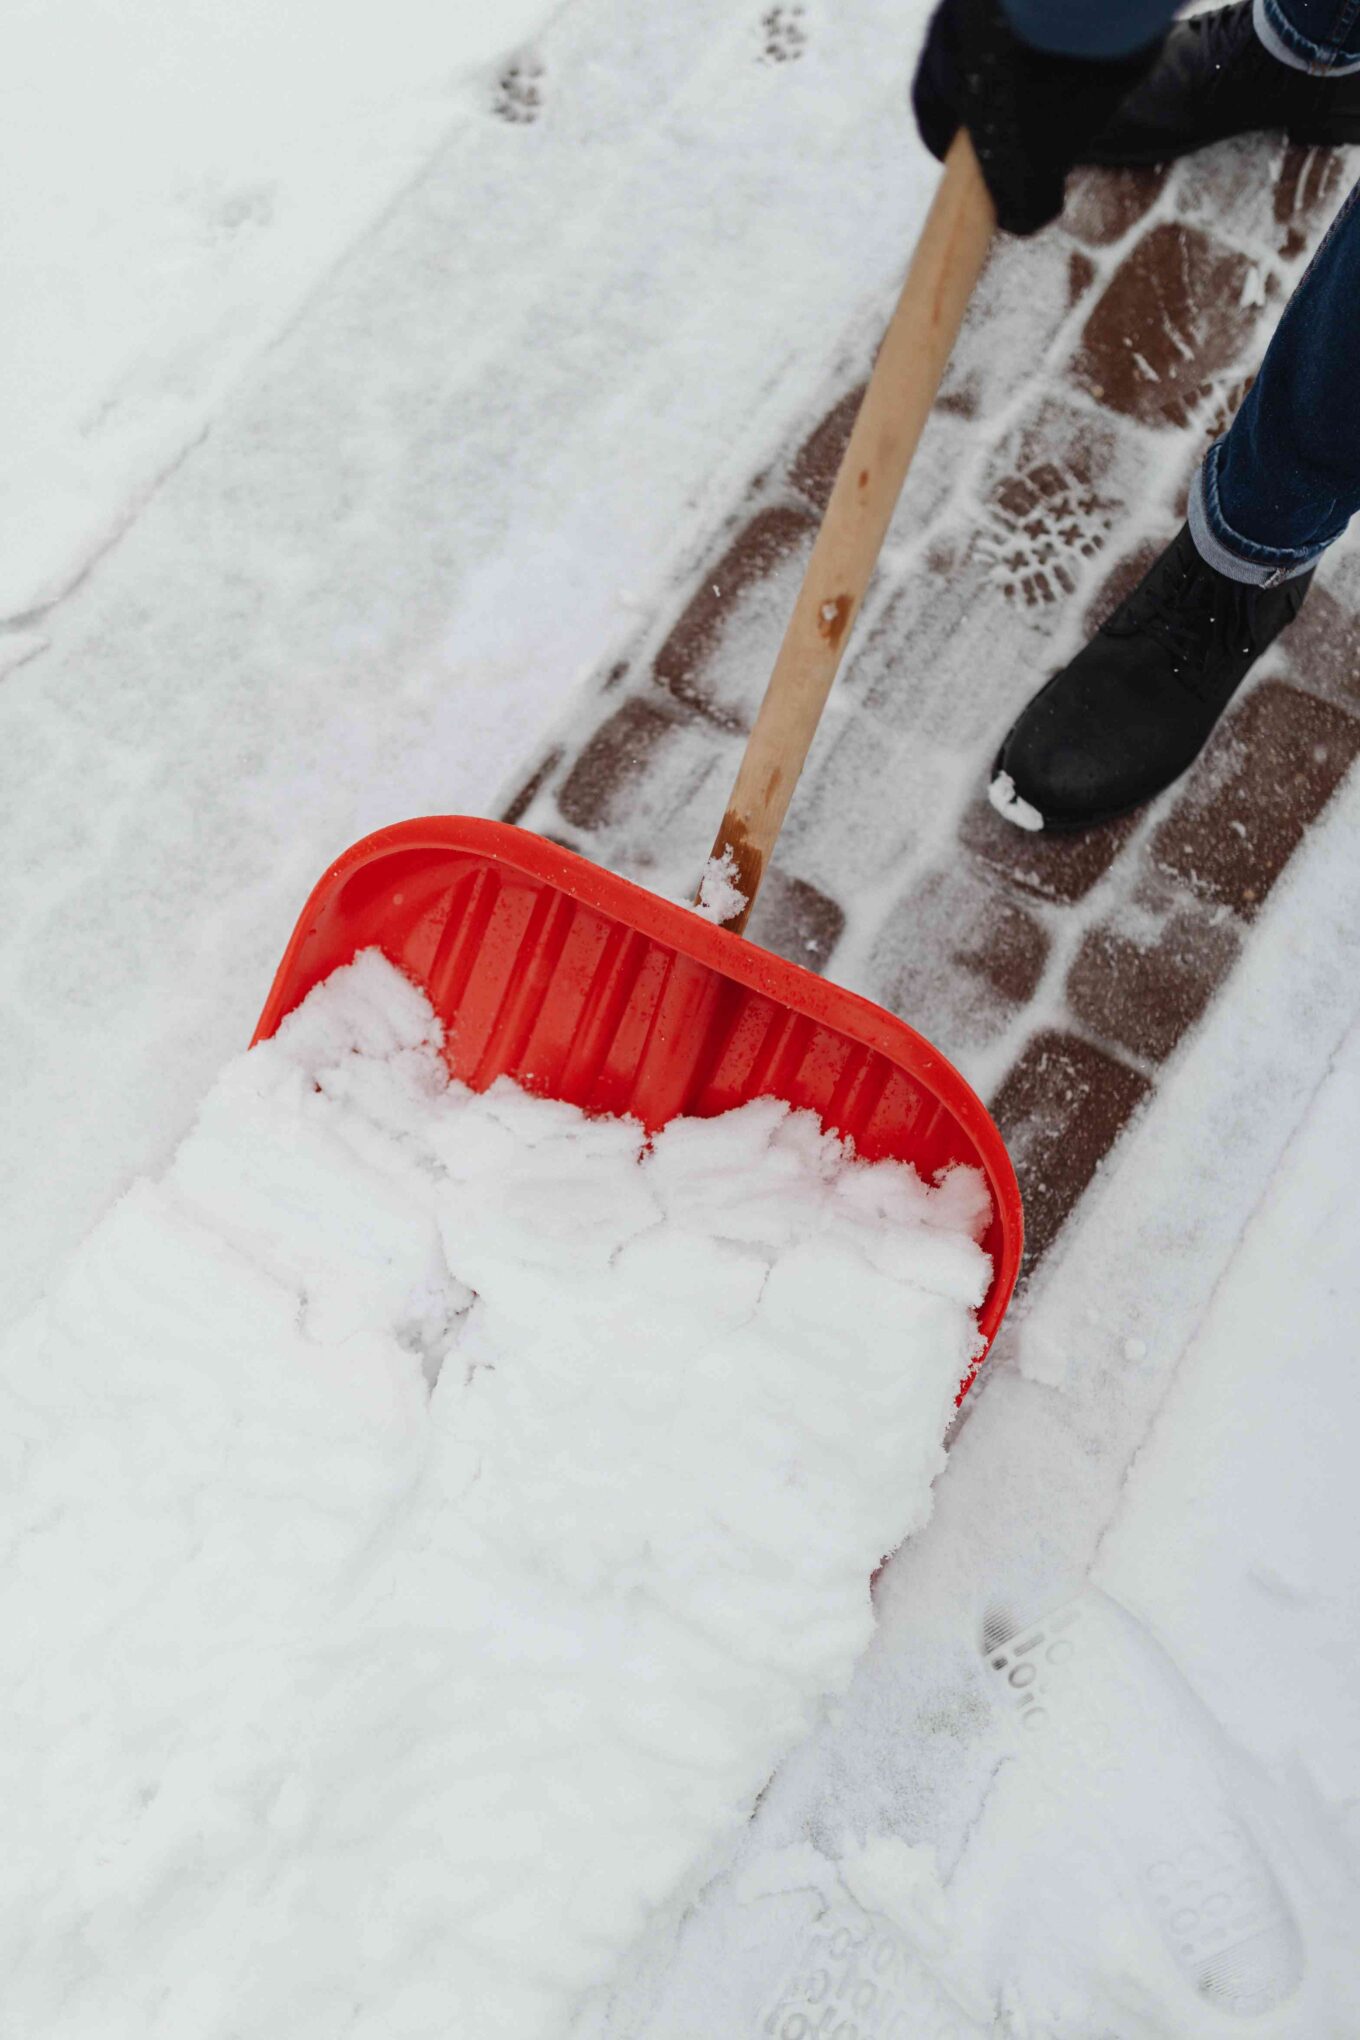 Lawn Care and Snow Removal: Essential Home Maintenance Tasks